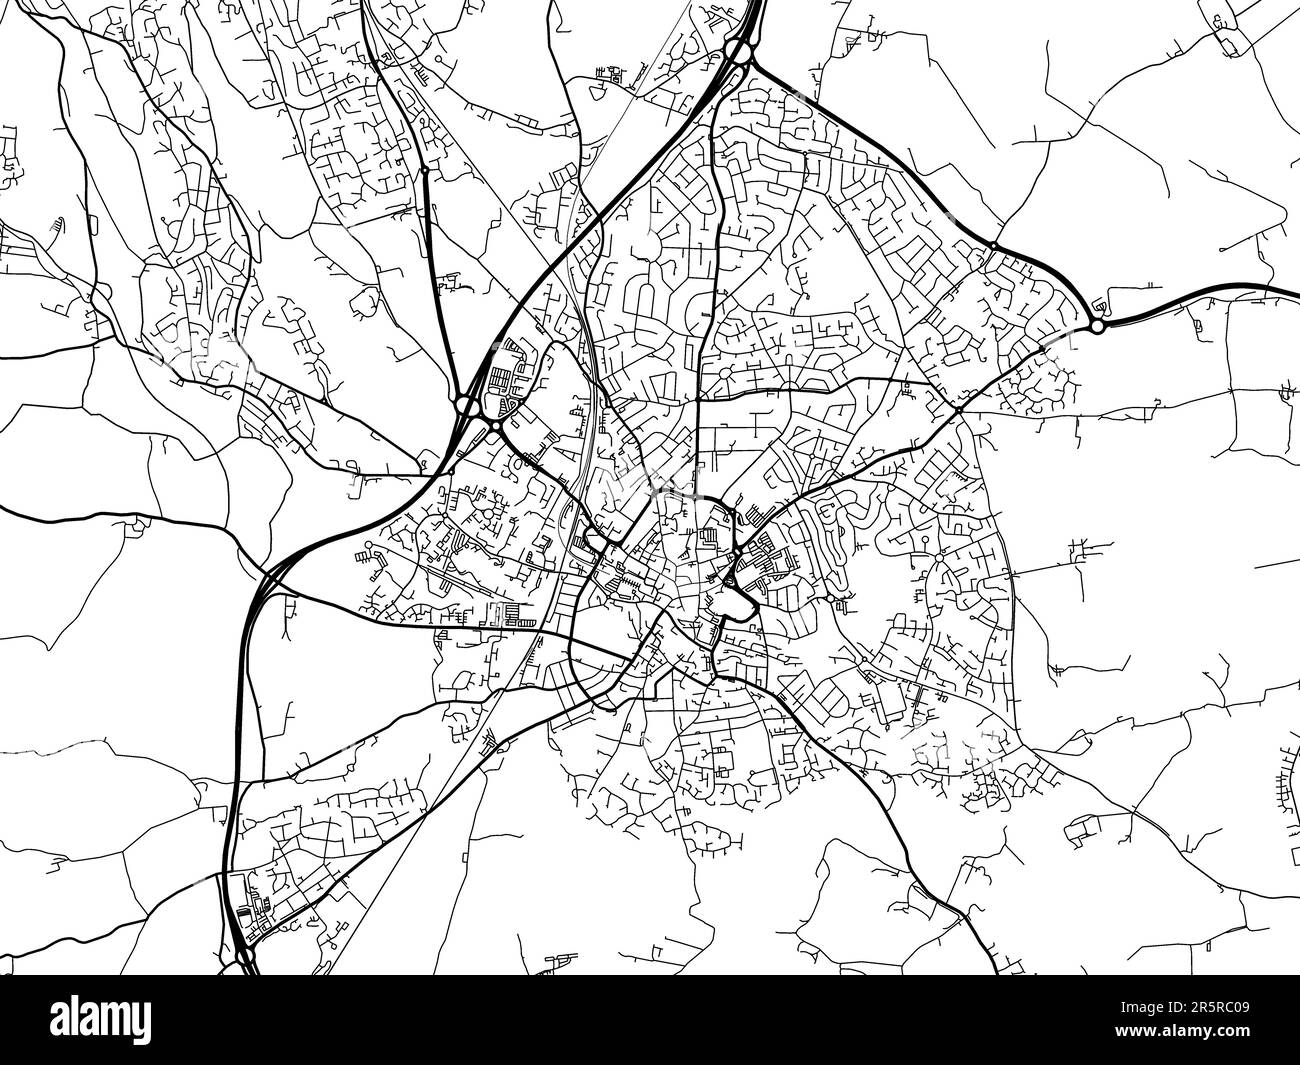 Road map of the city of  Wrexham in the United Kingdom on a white background. Stock Photo